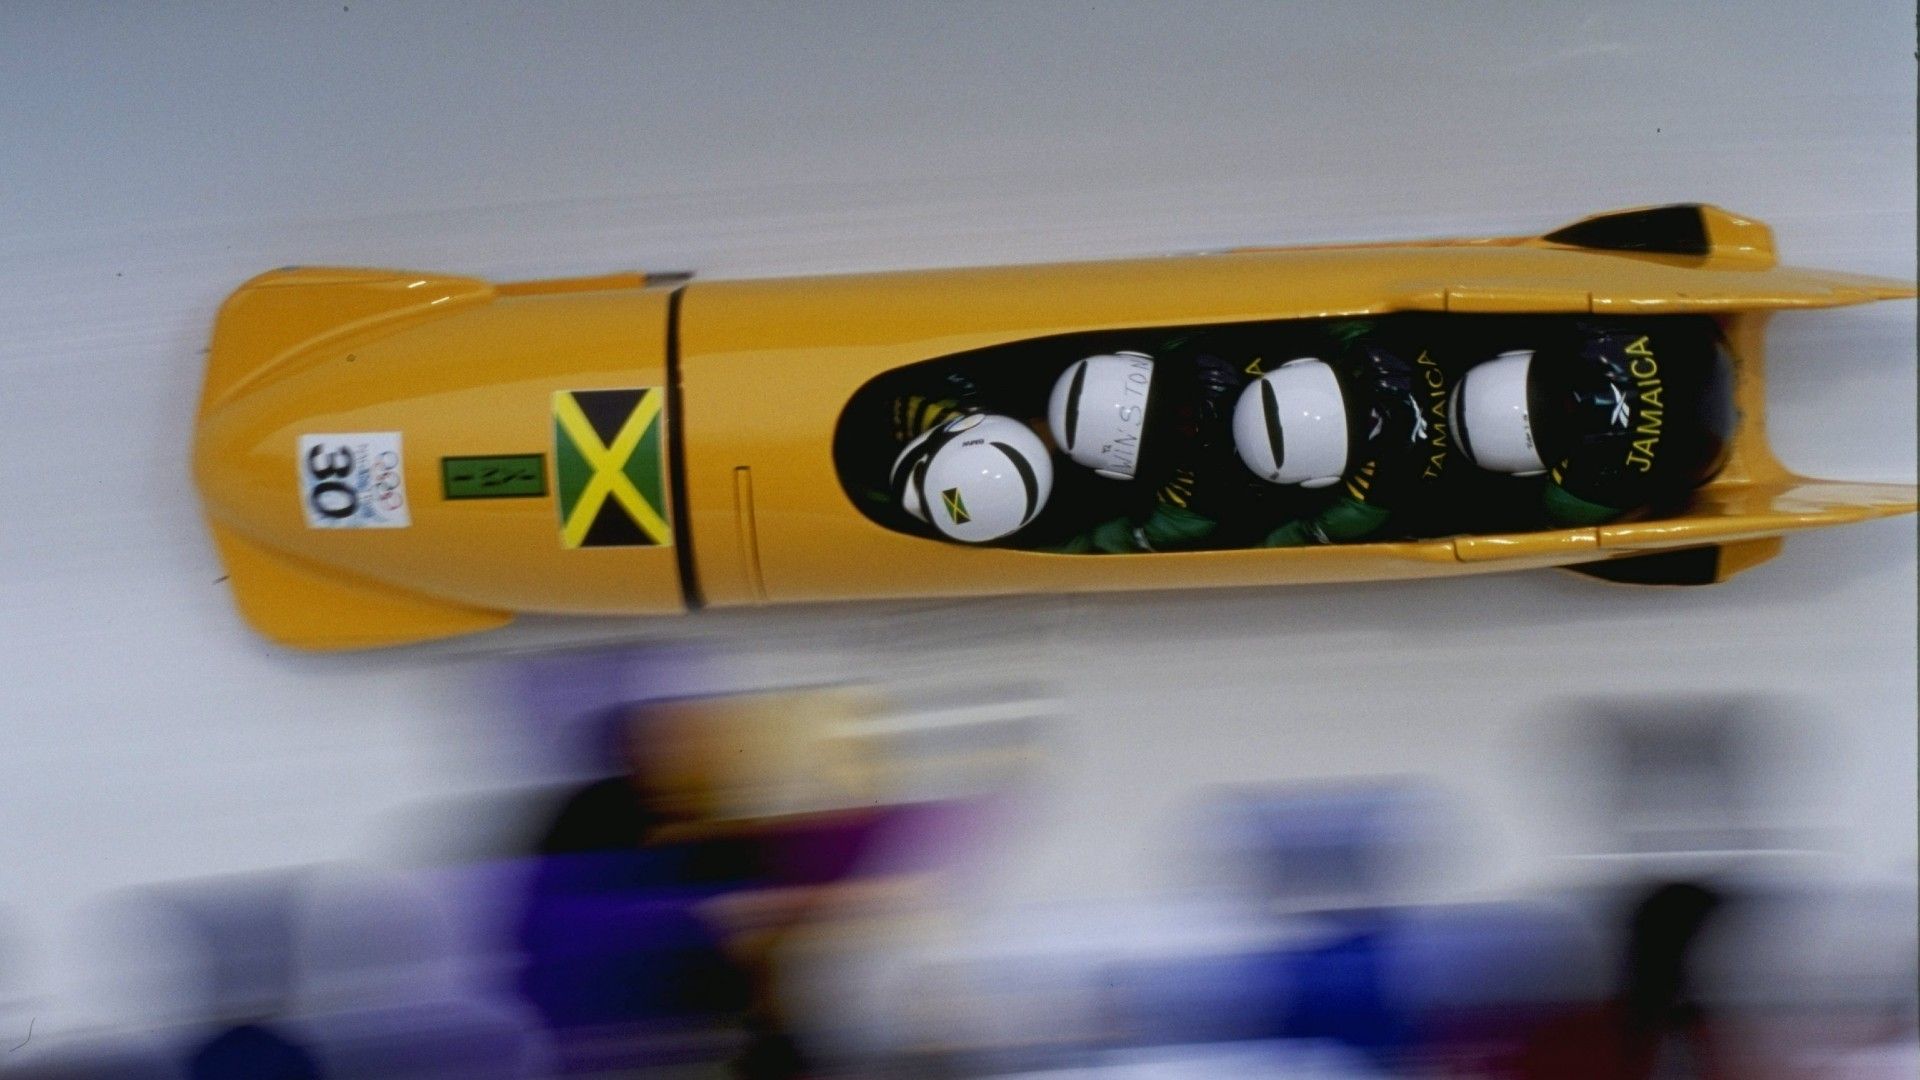 Jamaica qualify for four-man bobsled for first time since 1998